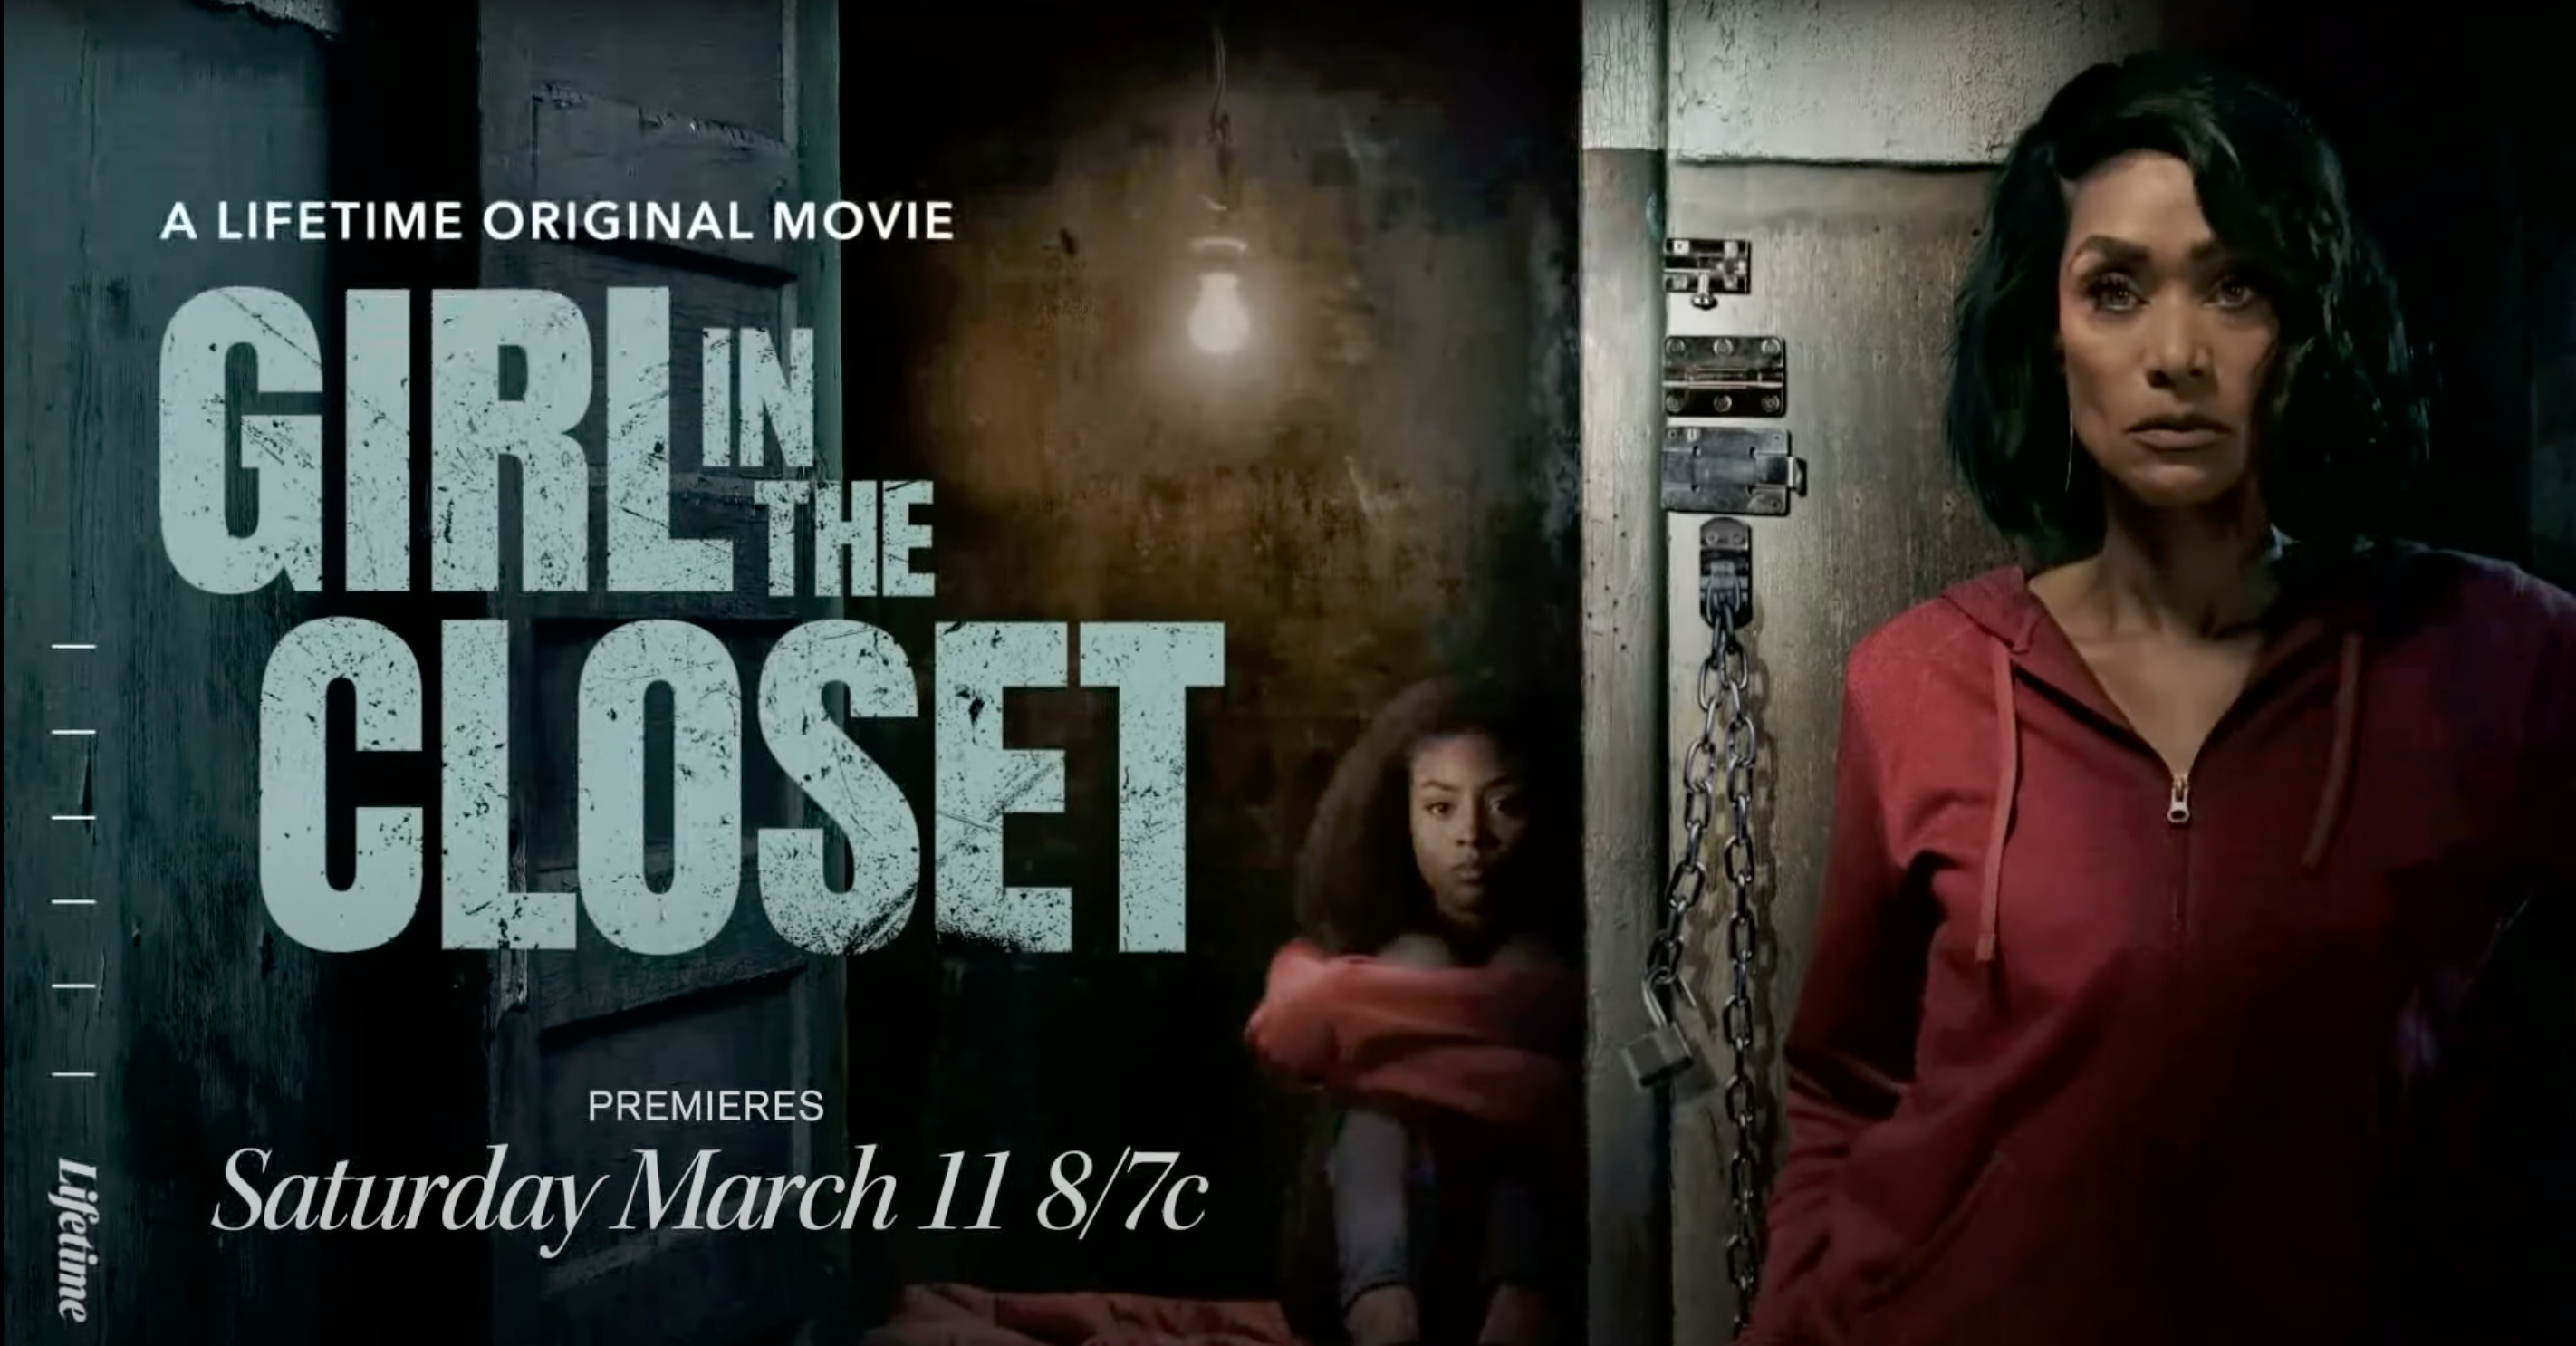 Girl In the Closet premieres March 11